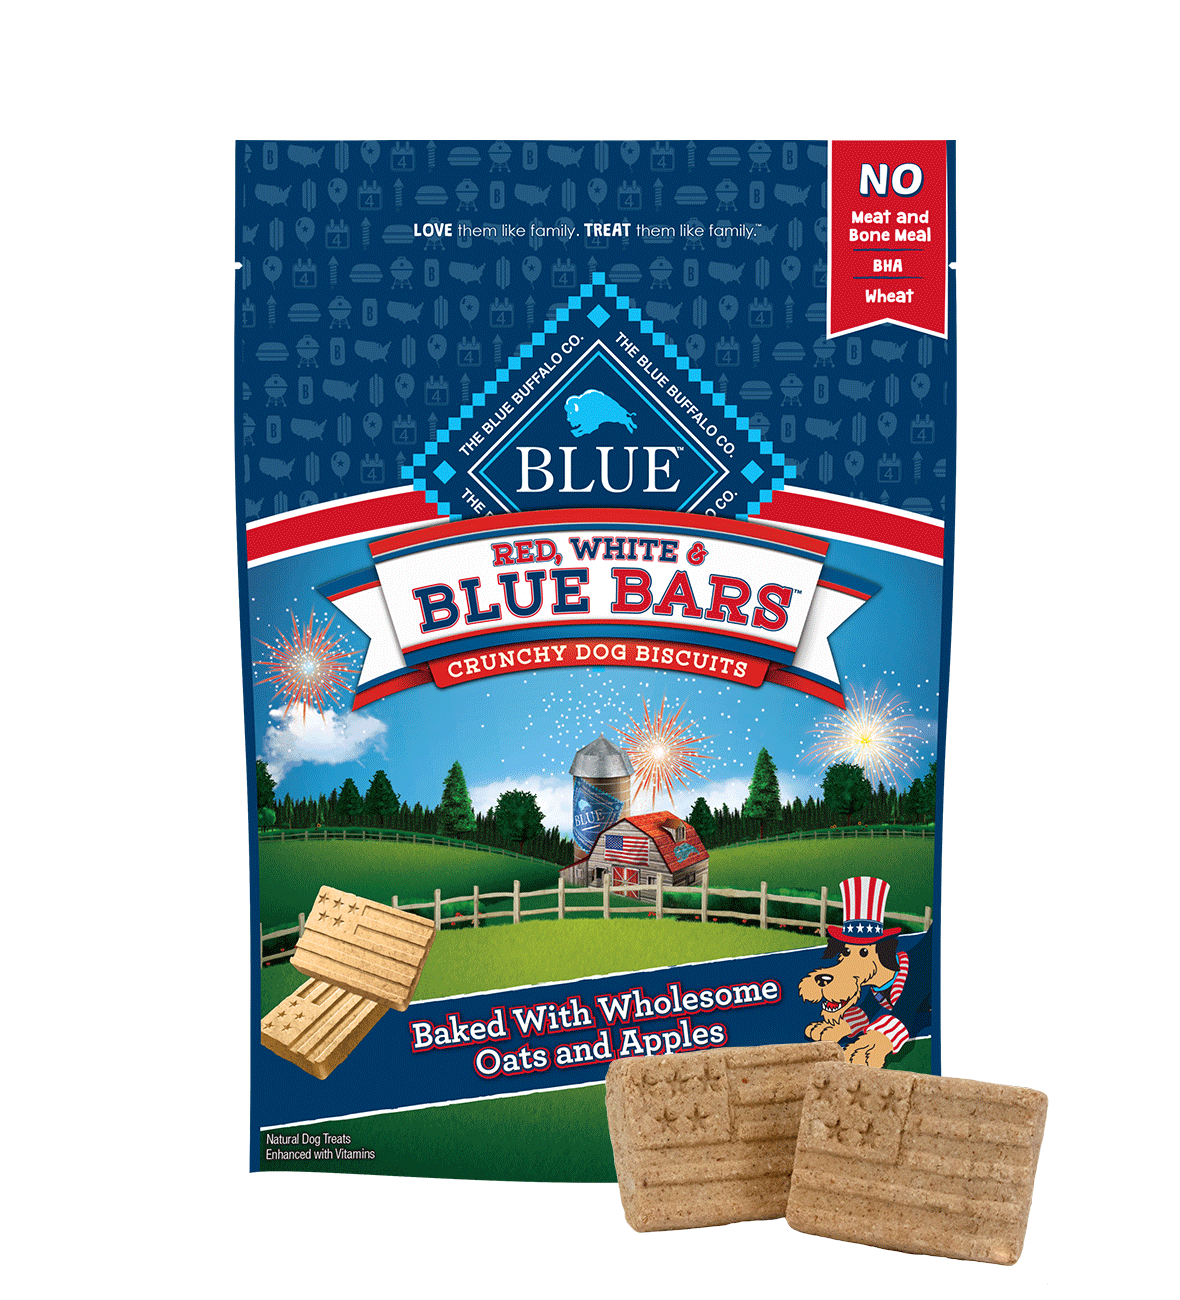 red, white & blue bars crunchy dog biscuits dog treats